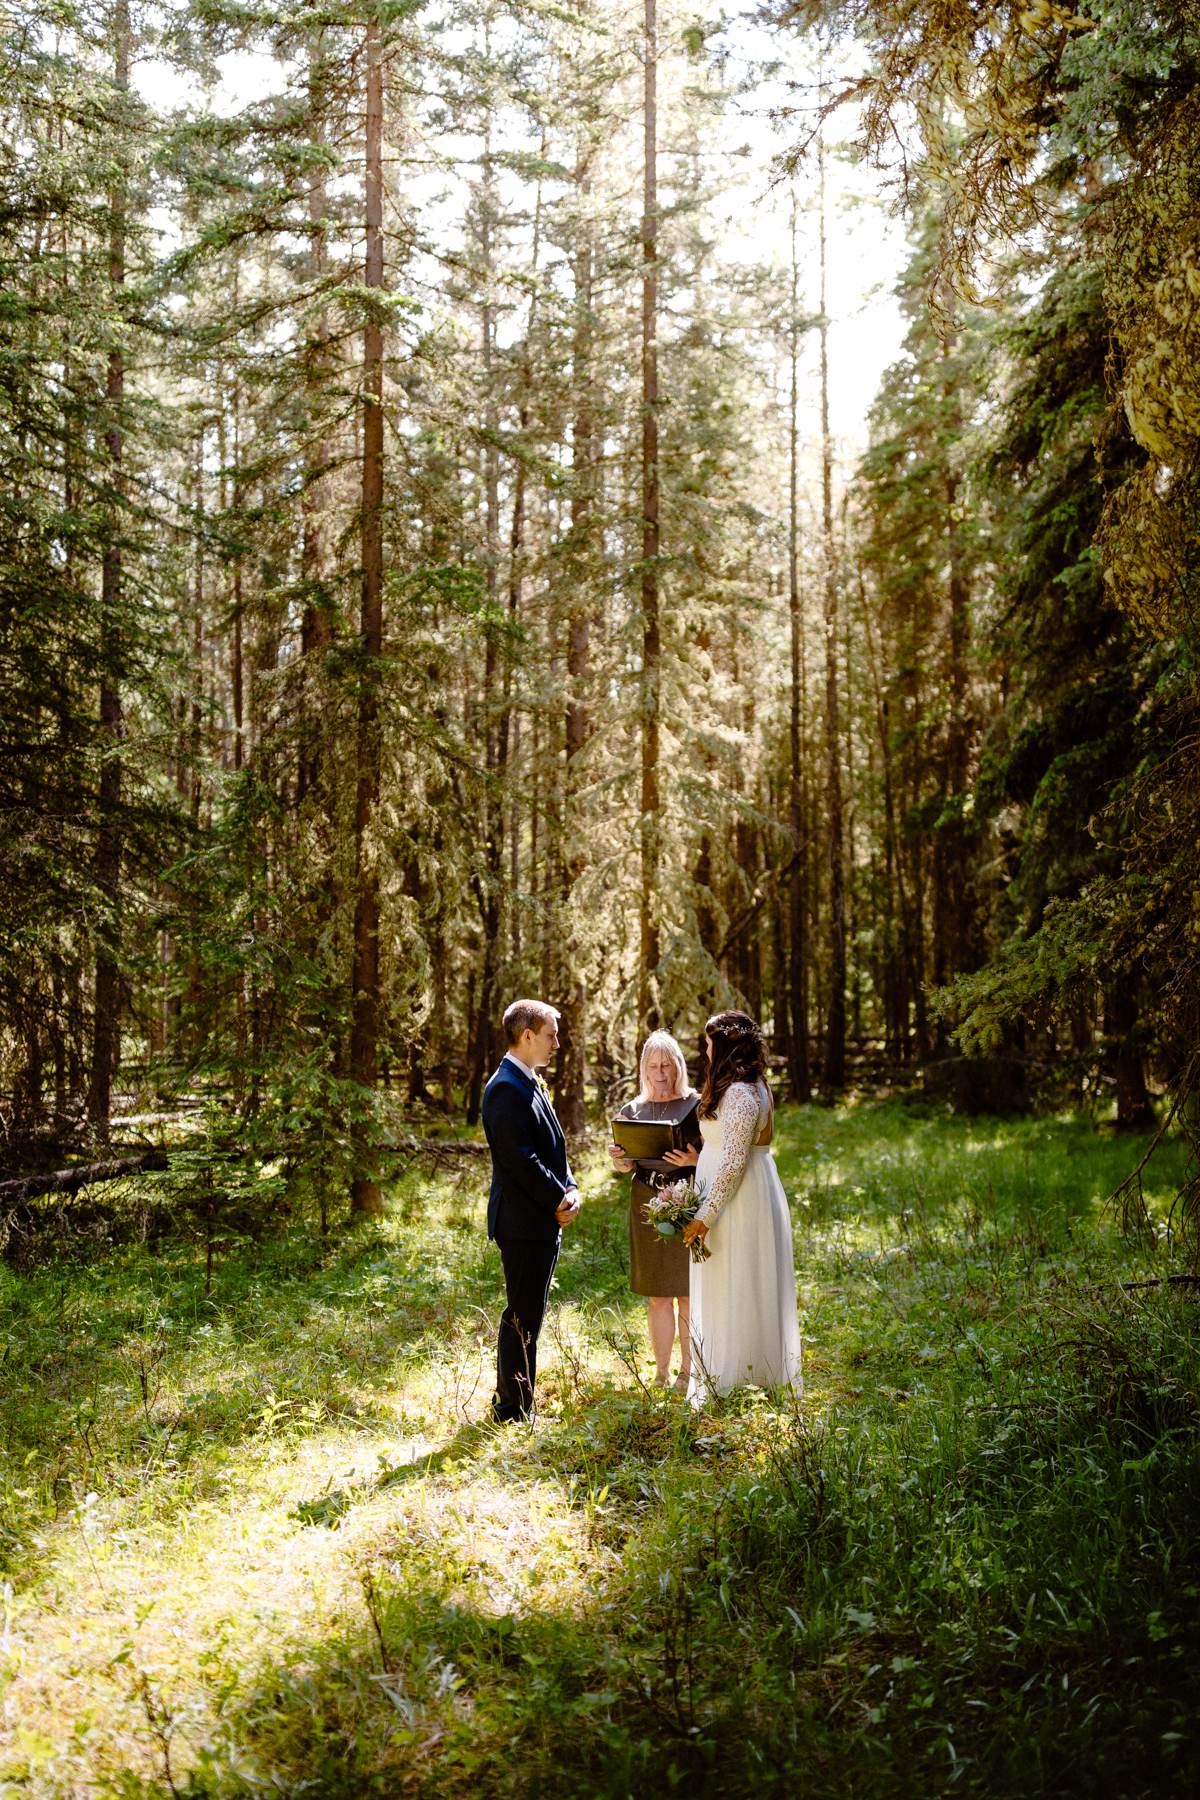 Vow Renewal Photography in Banff - Image 1